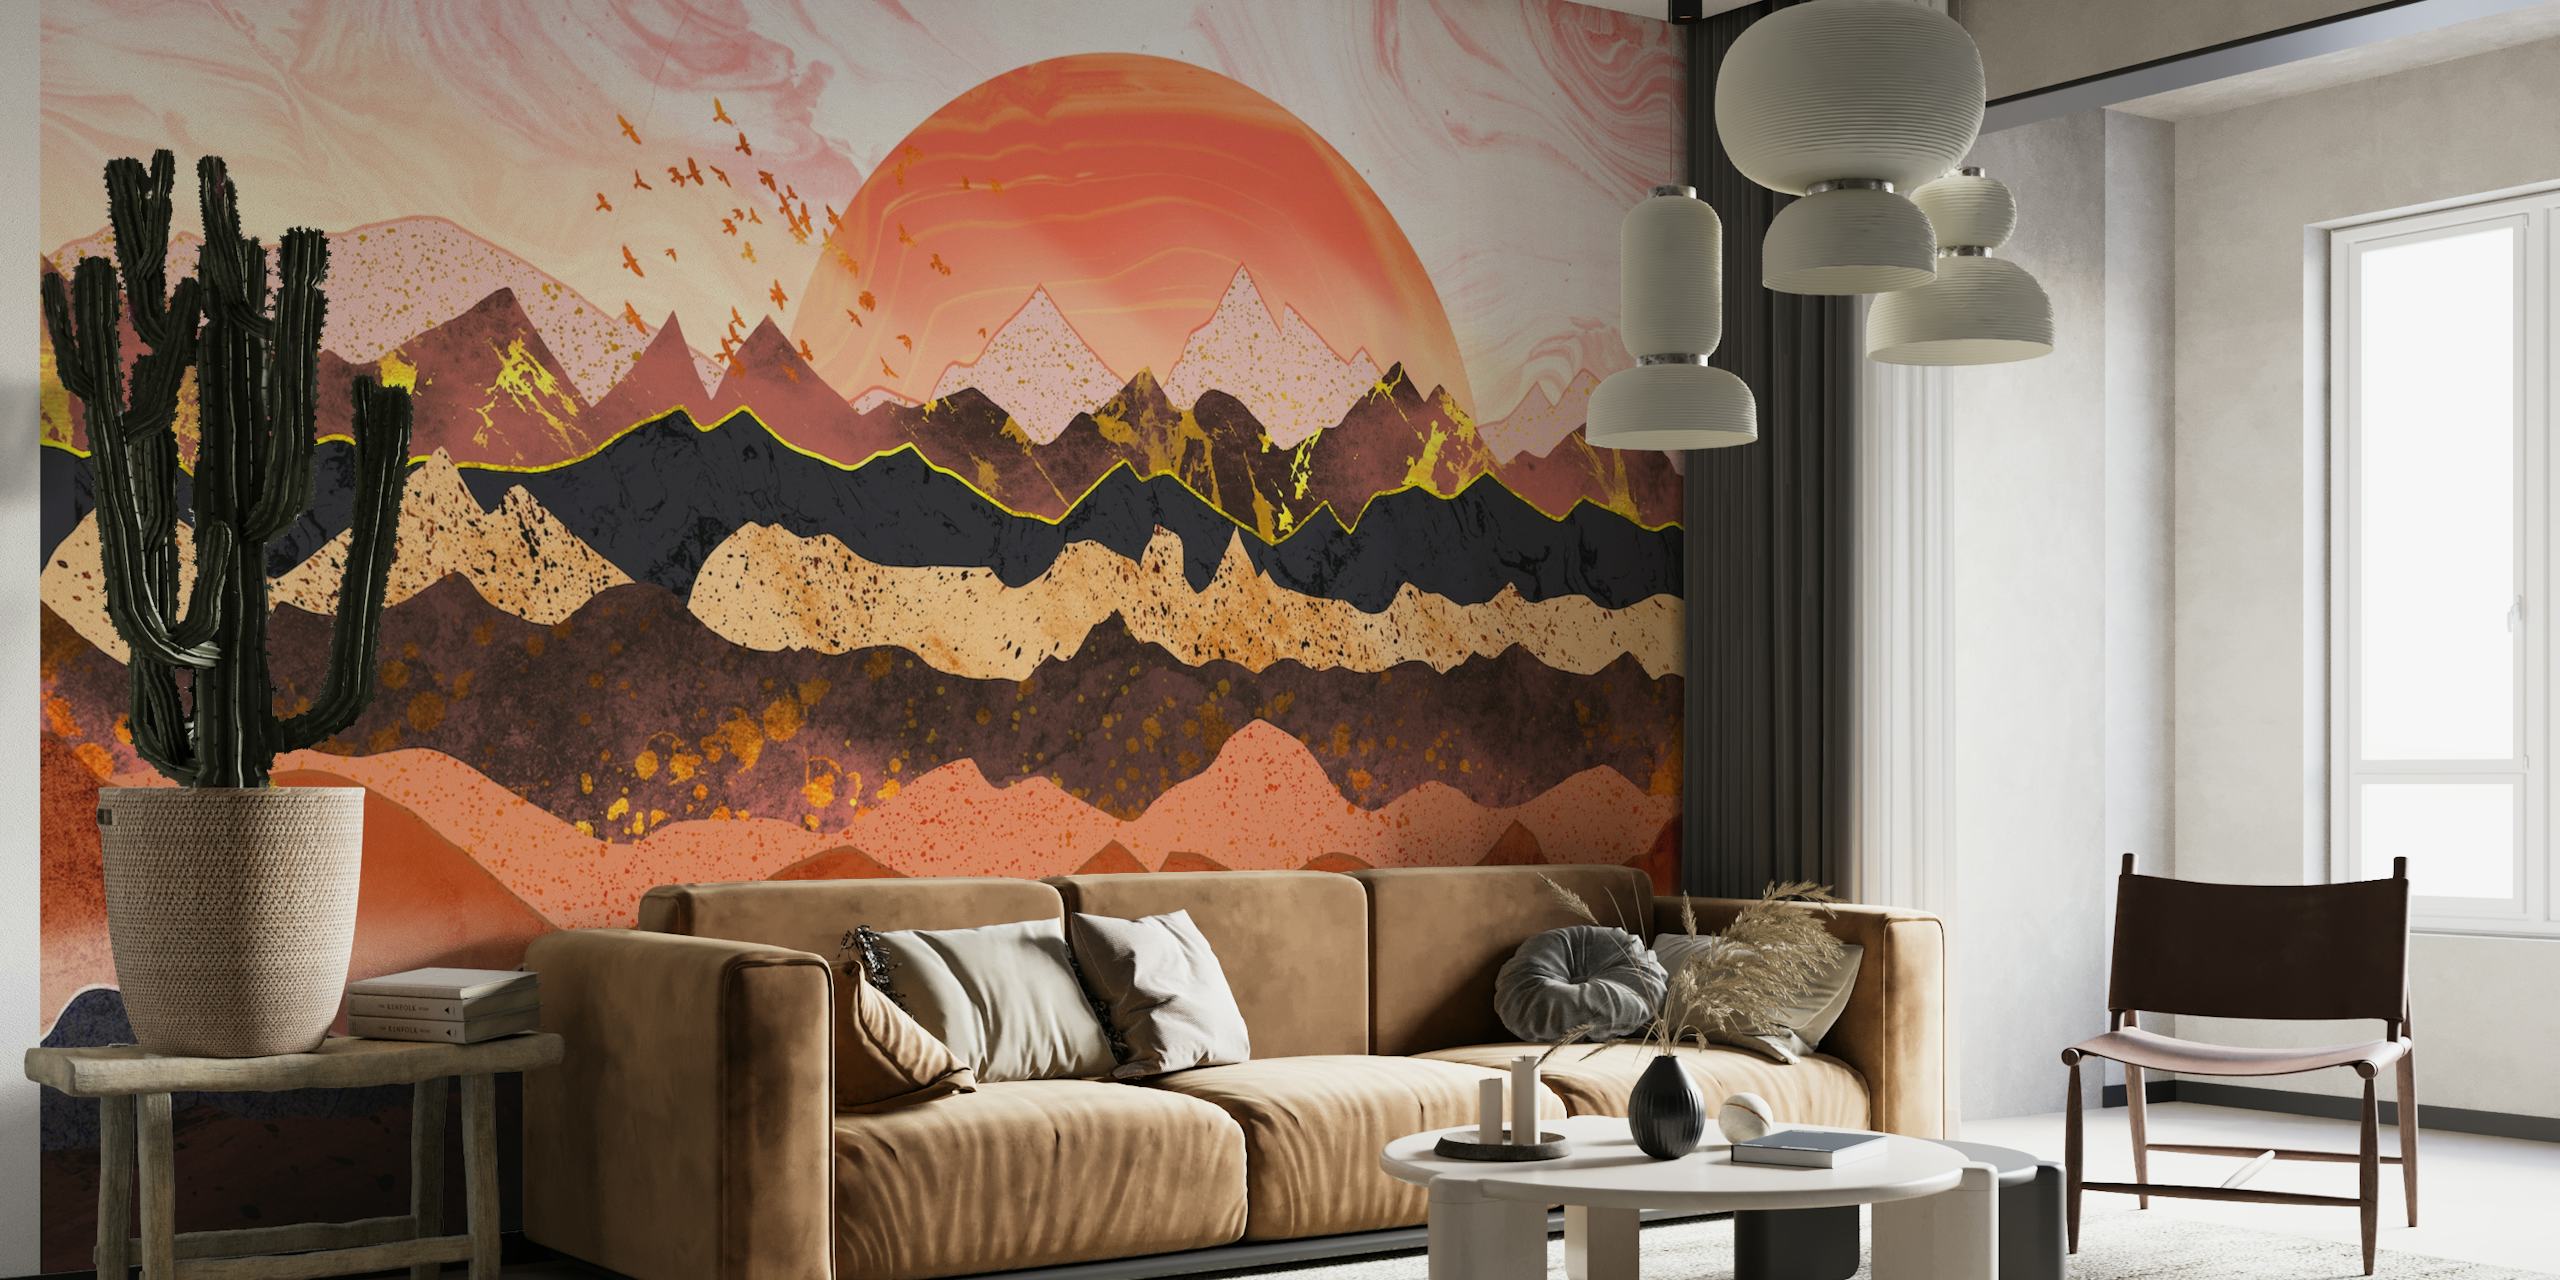 Abstract mountain landscape wall mural with sunset in warm tones of pink, amber, and brown